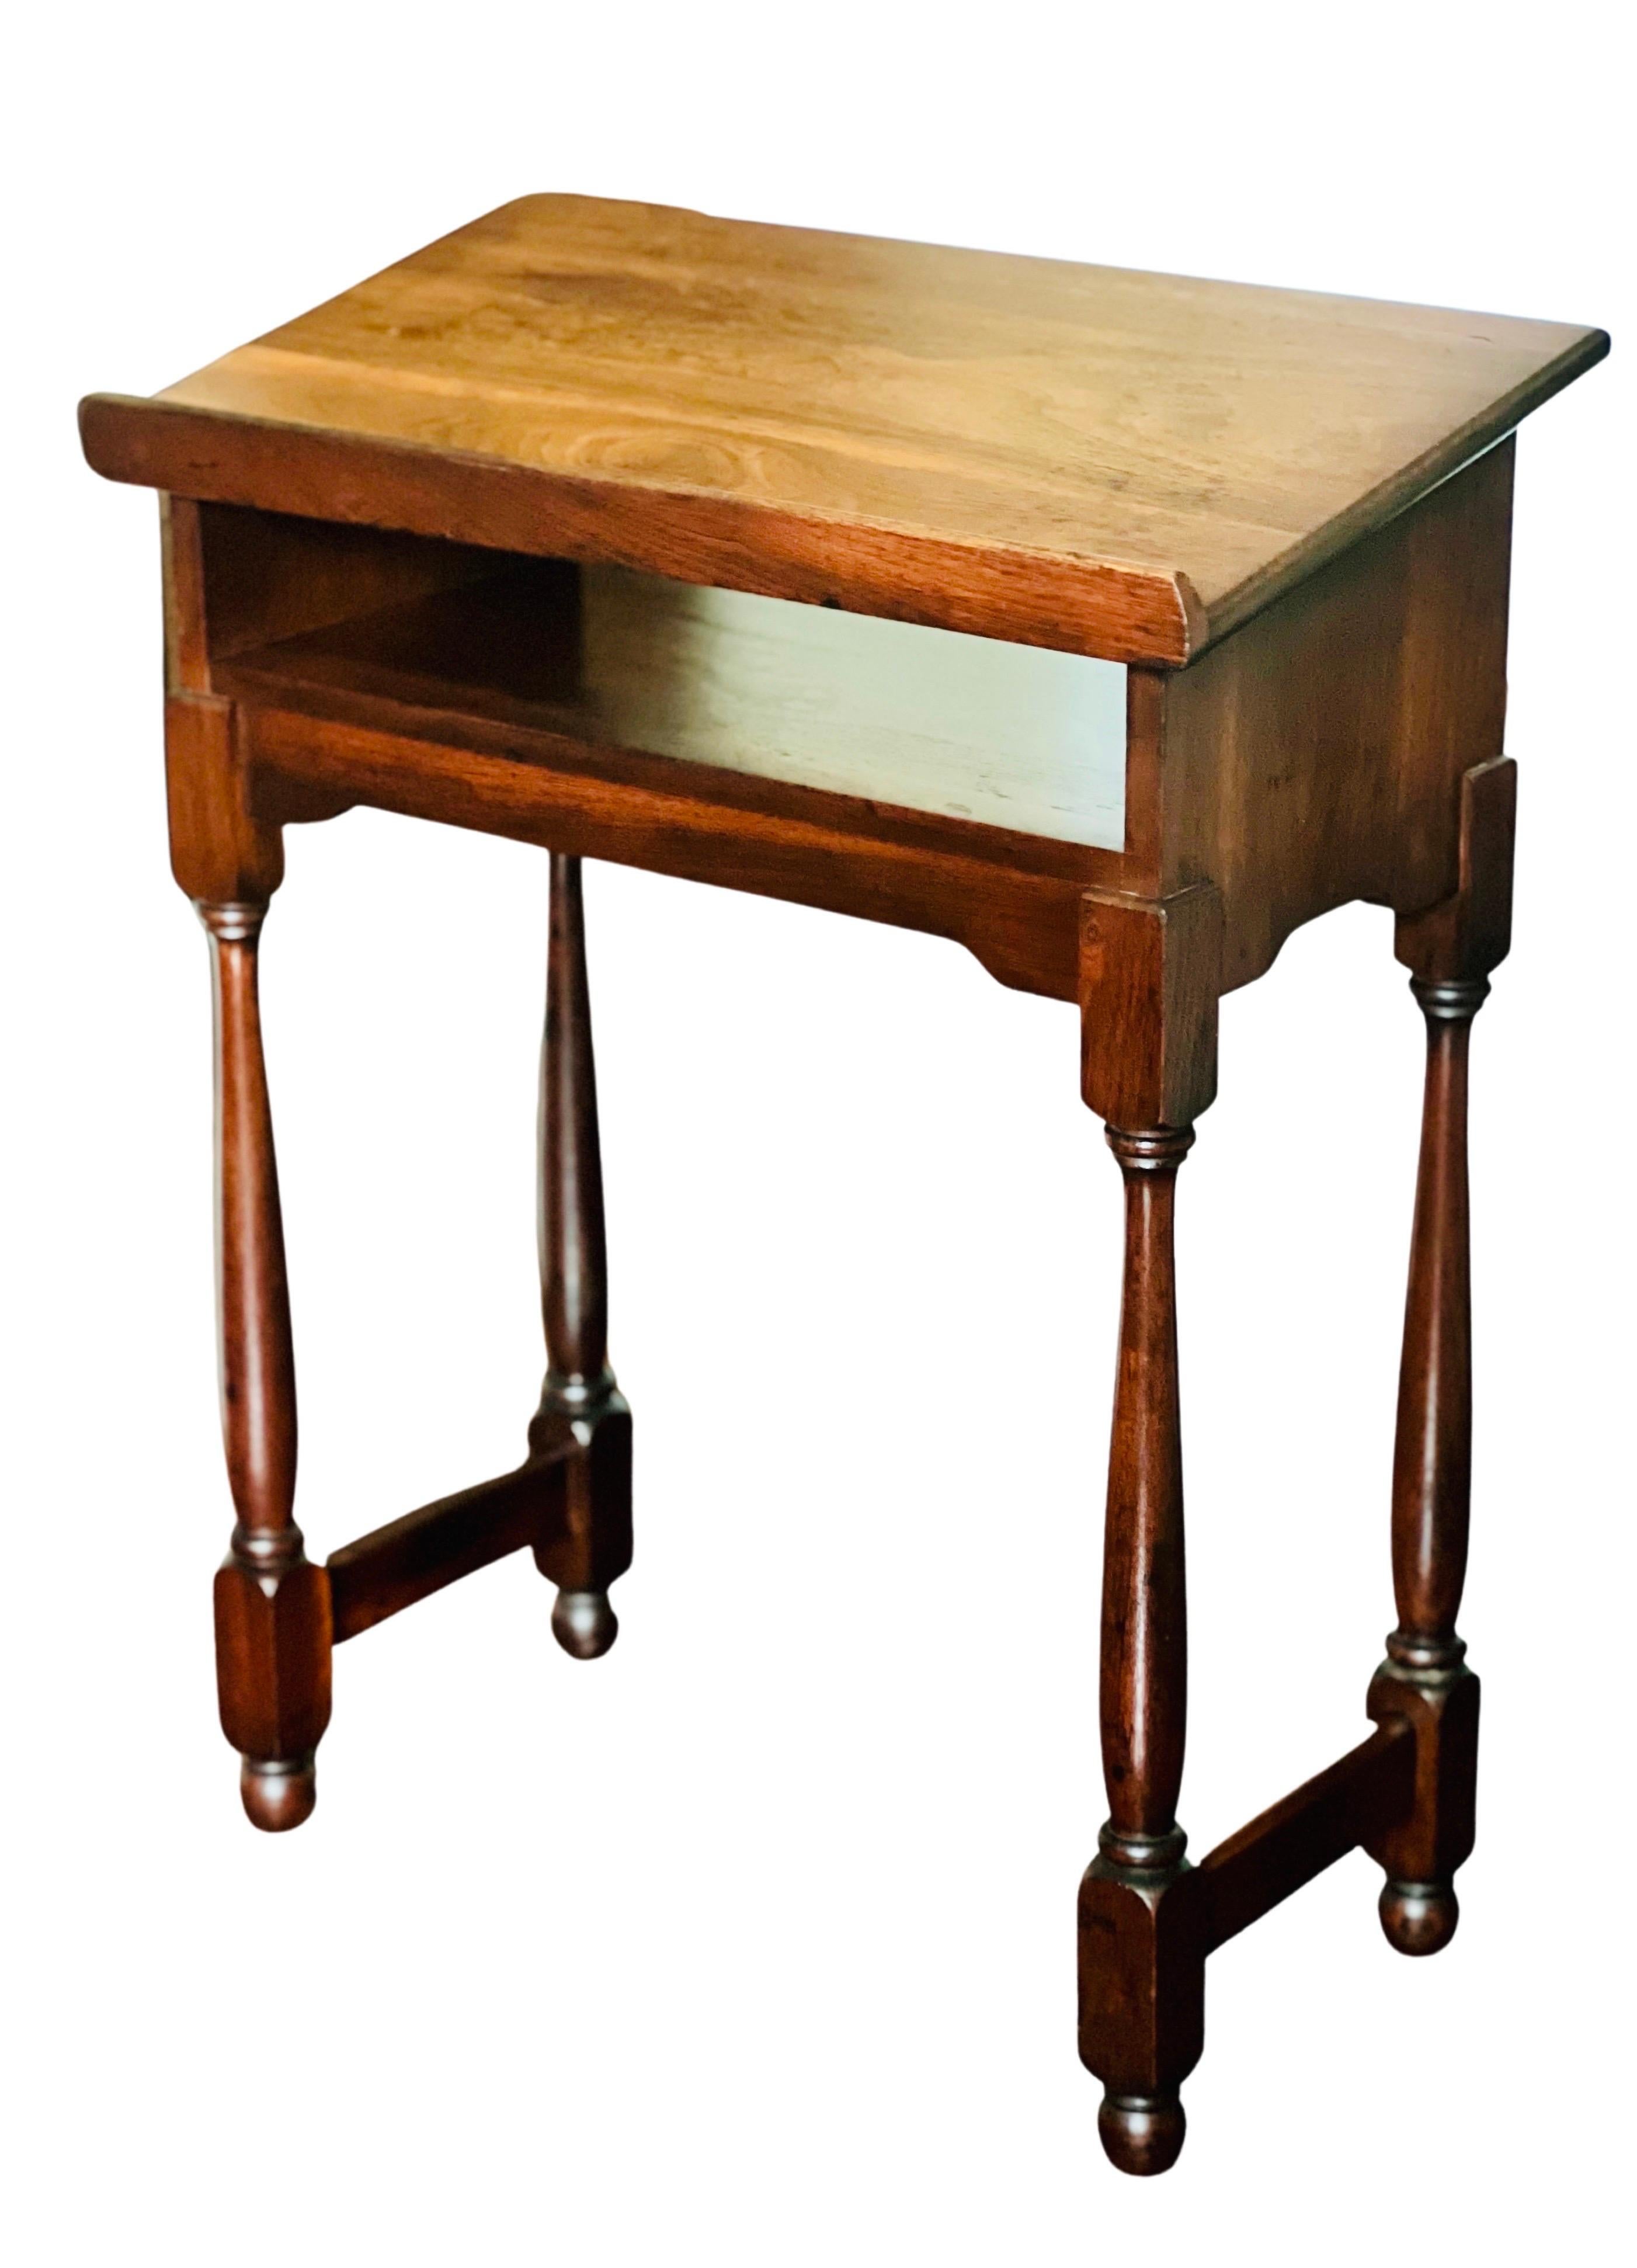 Antique Colonial Revival Small Walnut Lectern or Music Stand In Good Condition For Sale In Doylestown, PA